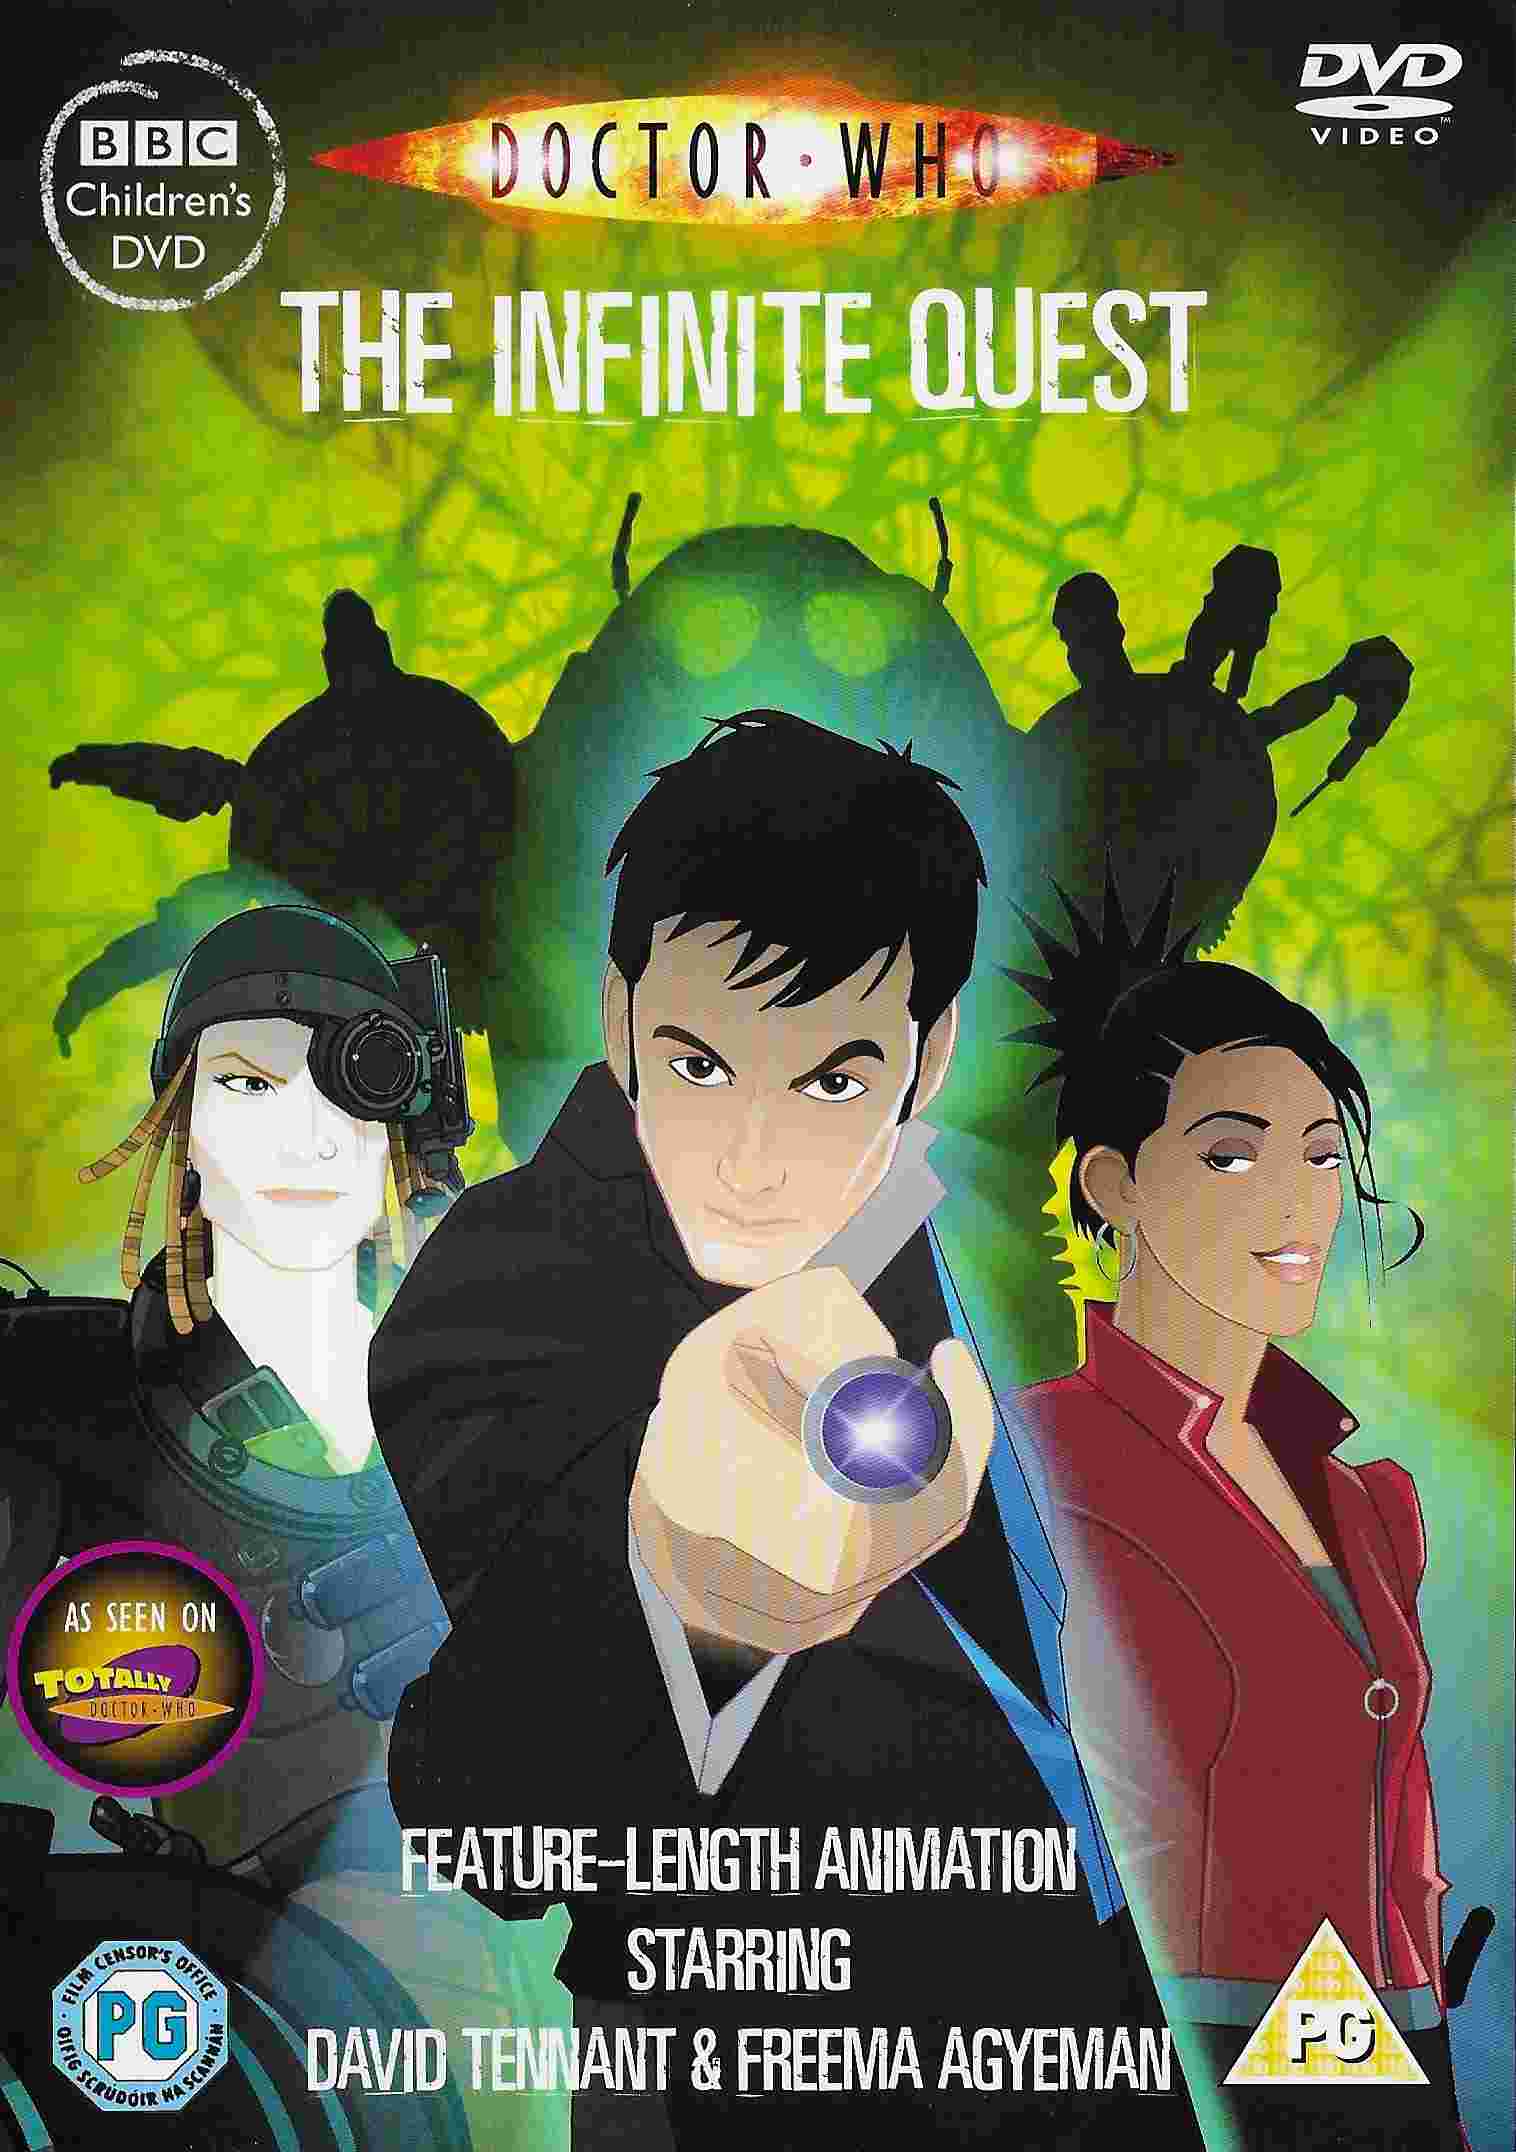 Picture of BBCDVD 2452 Doctor Who - The infinite quest by artist Alan Barnes